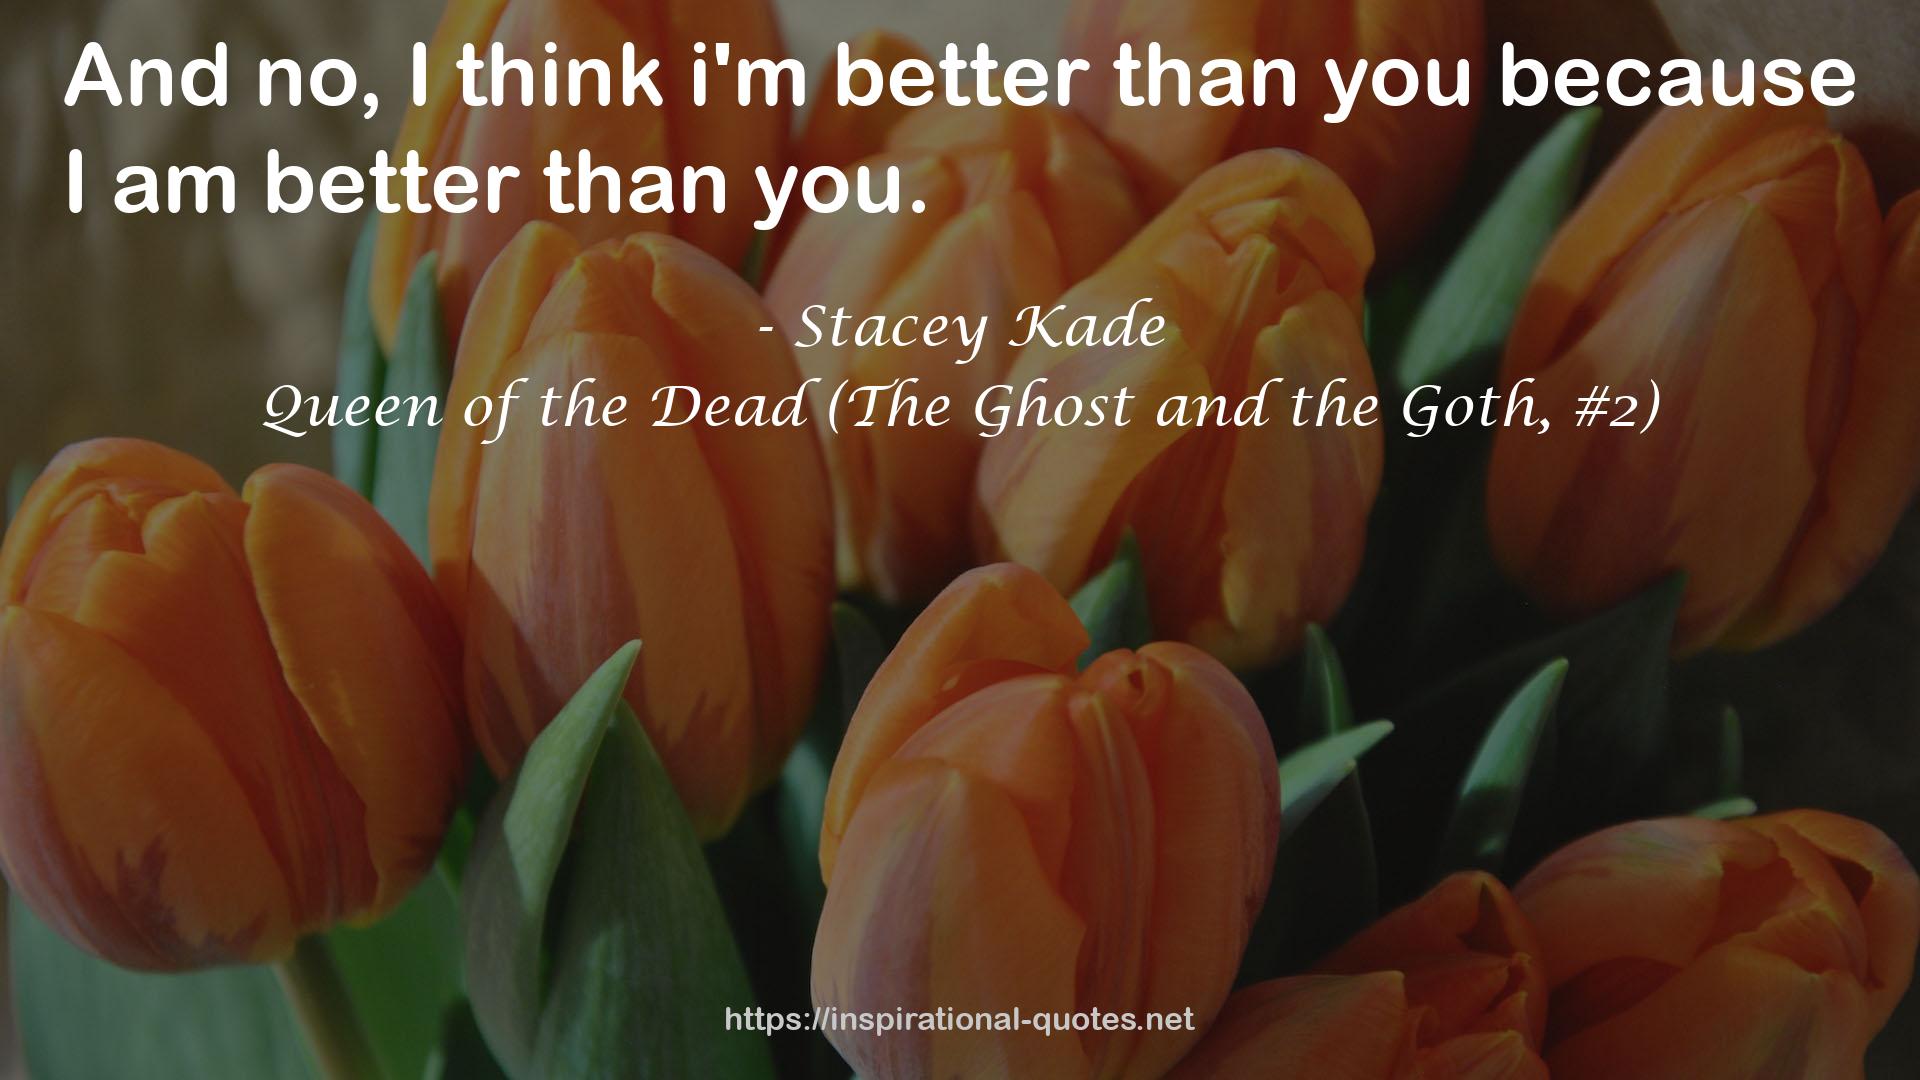 Queen of the Dead (The Ghost and the Goth, #2) QUOTES